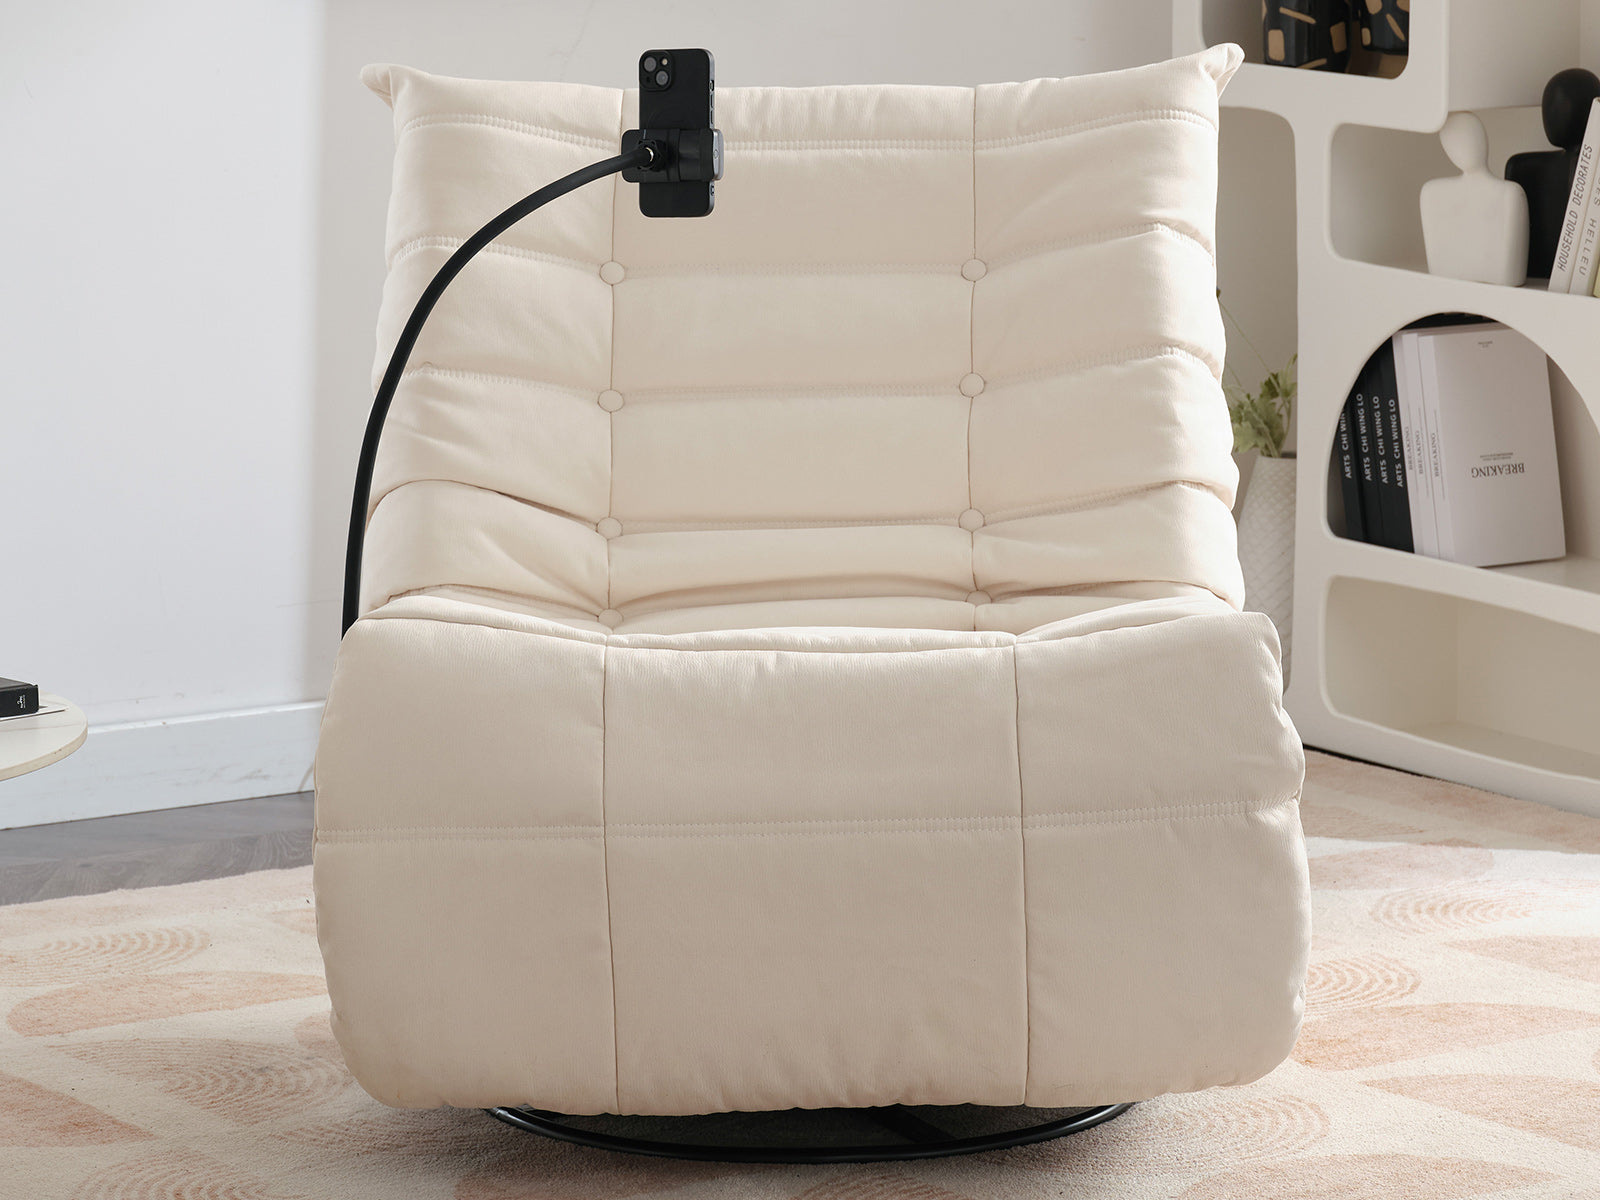 Mjkone Oversized Electric Recliner Chair Swivel Glider Rocking Chair with USB Port Modern Faux Leather Reclining Sofa Chair with Smart Voice Control & Bluetooth Control Theater Seating